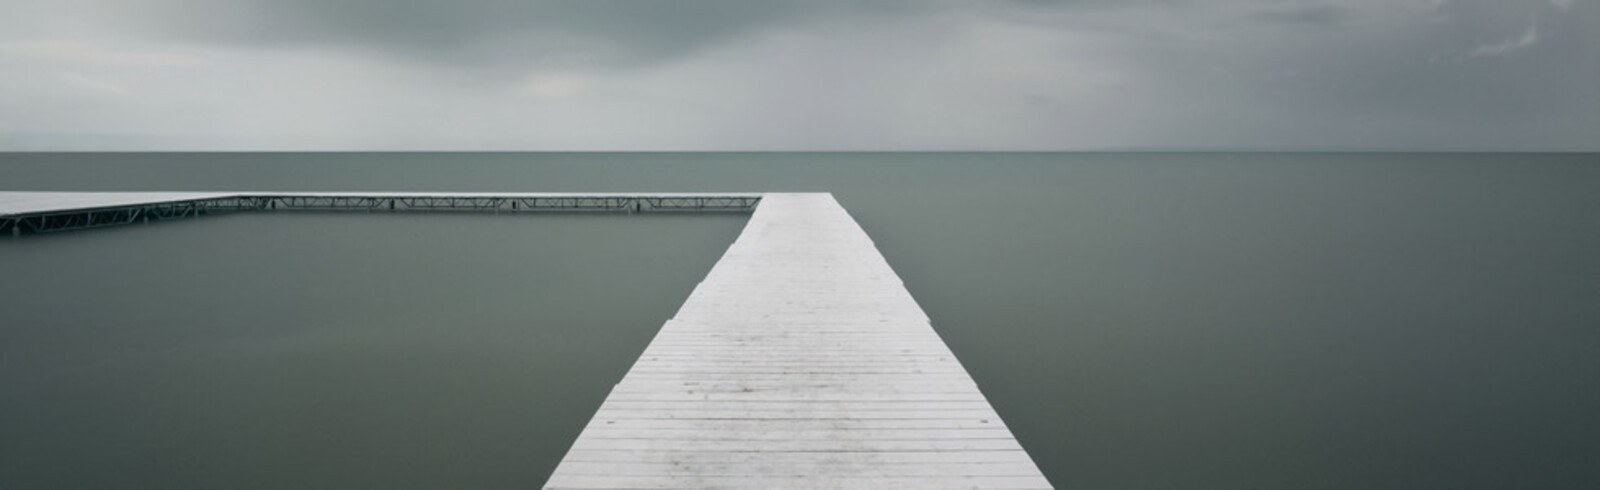 Akos Major - Pictures, Art, Photography